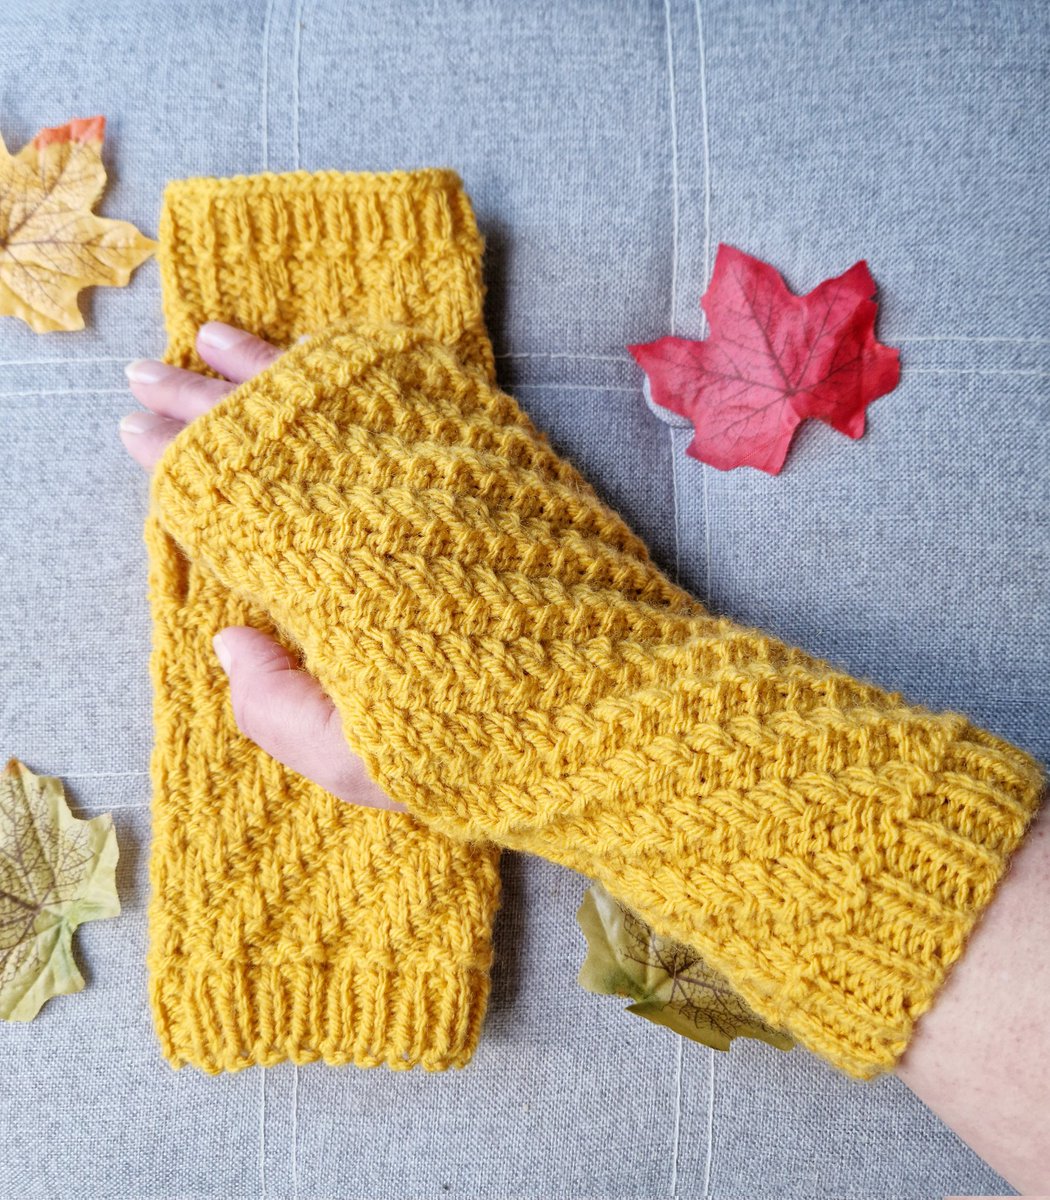 Hello, sunshine! ☀️ Well, we can but wish, can't we? But, seriously, these eye-popping wristwarmers are a whole dose of colour and sunshine therapy in themselves!

Miambaboutique.etsy.com 

#AutumnVibes #etsyfinds #etsyshop #craftbizparty #ukmakers #shopindie #elevenseshour